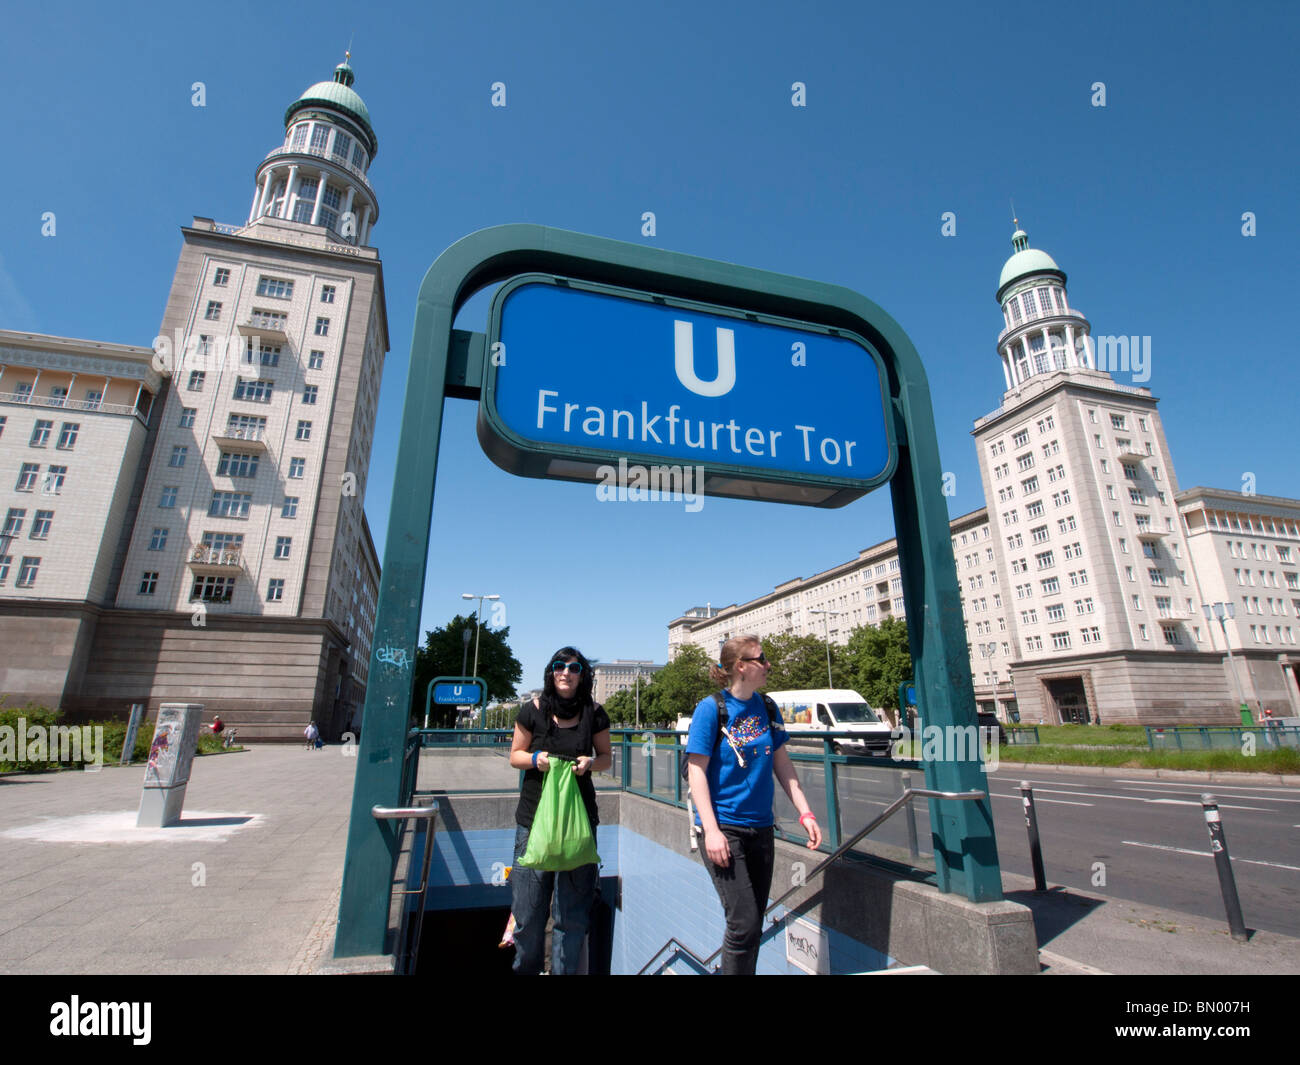 Underground station exit in front of famous East German era Frankfurter Tor buildings with towers on Karl Marx Allee in Berlin G Stock Photo